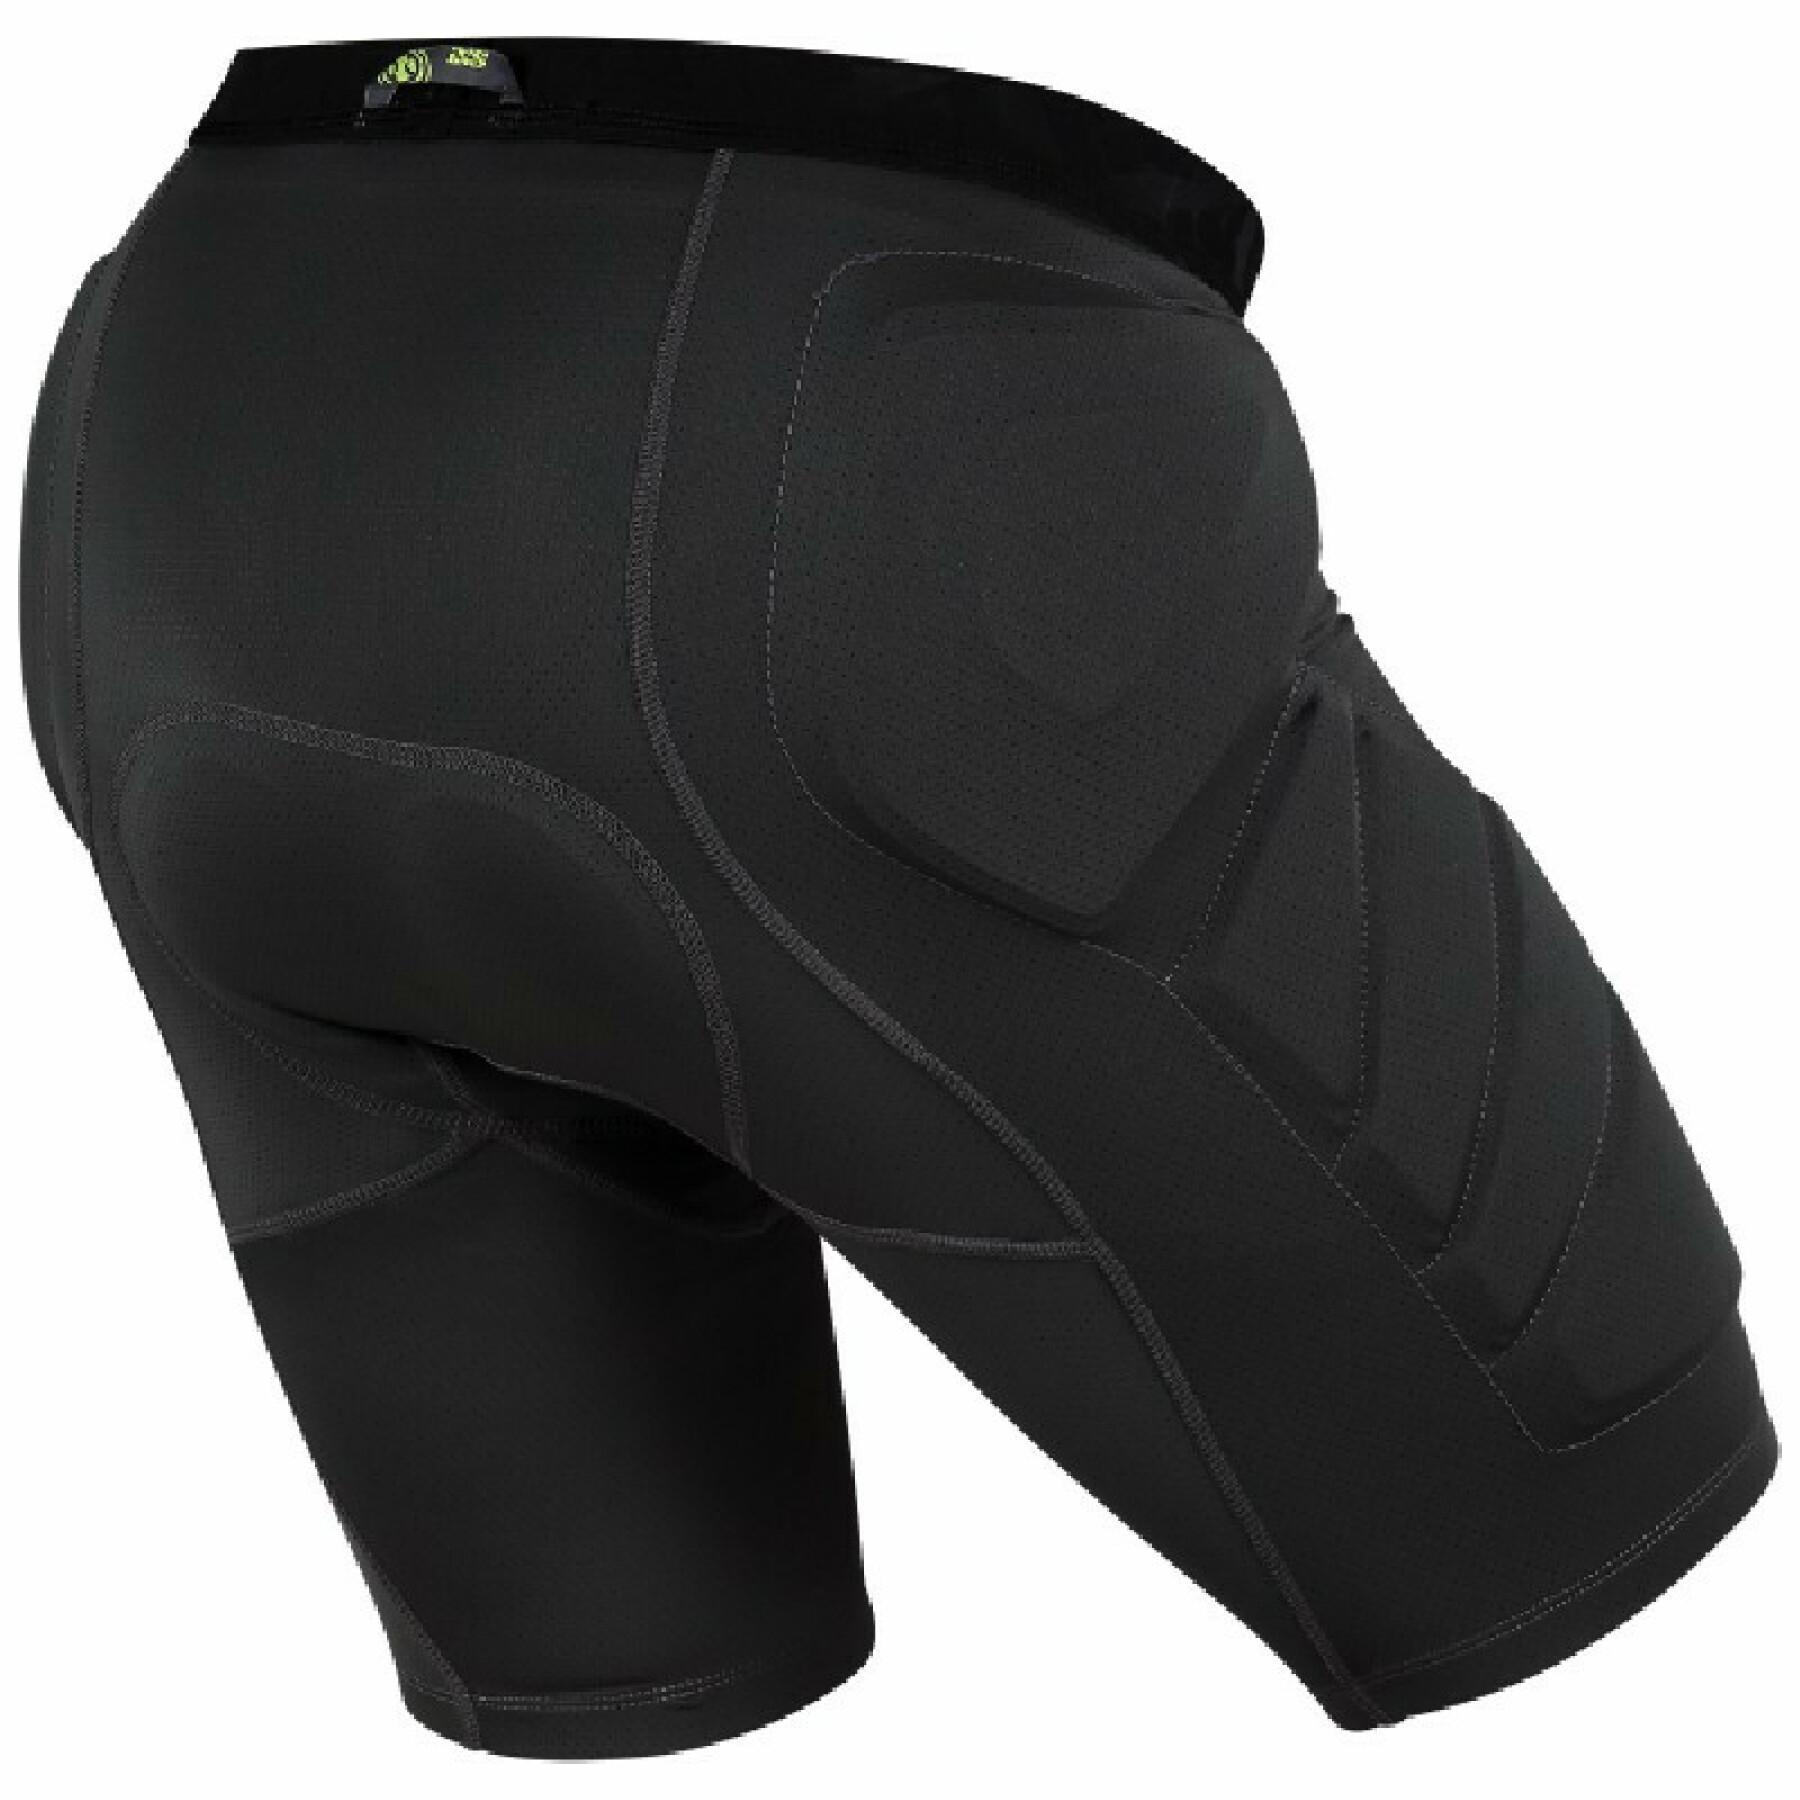 Bike shorts with protective lining IXS Trigger Lower